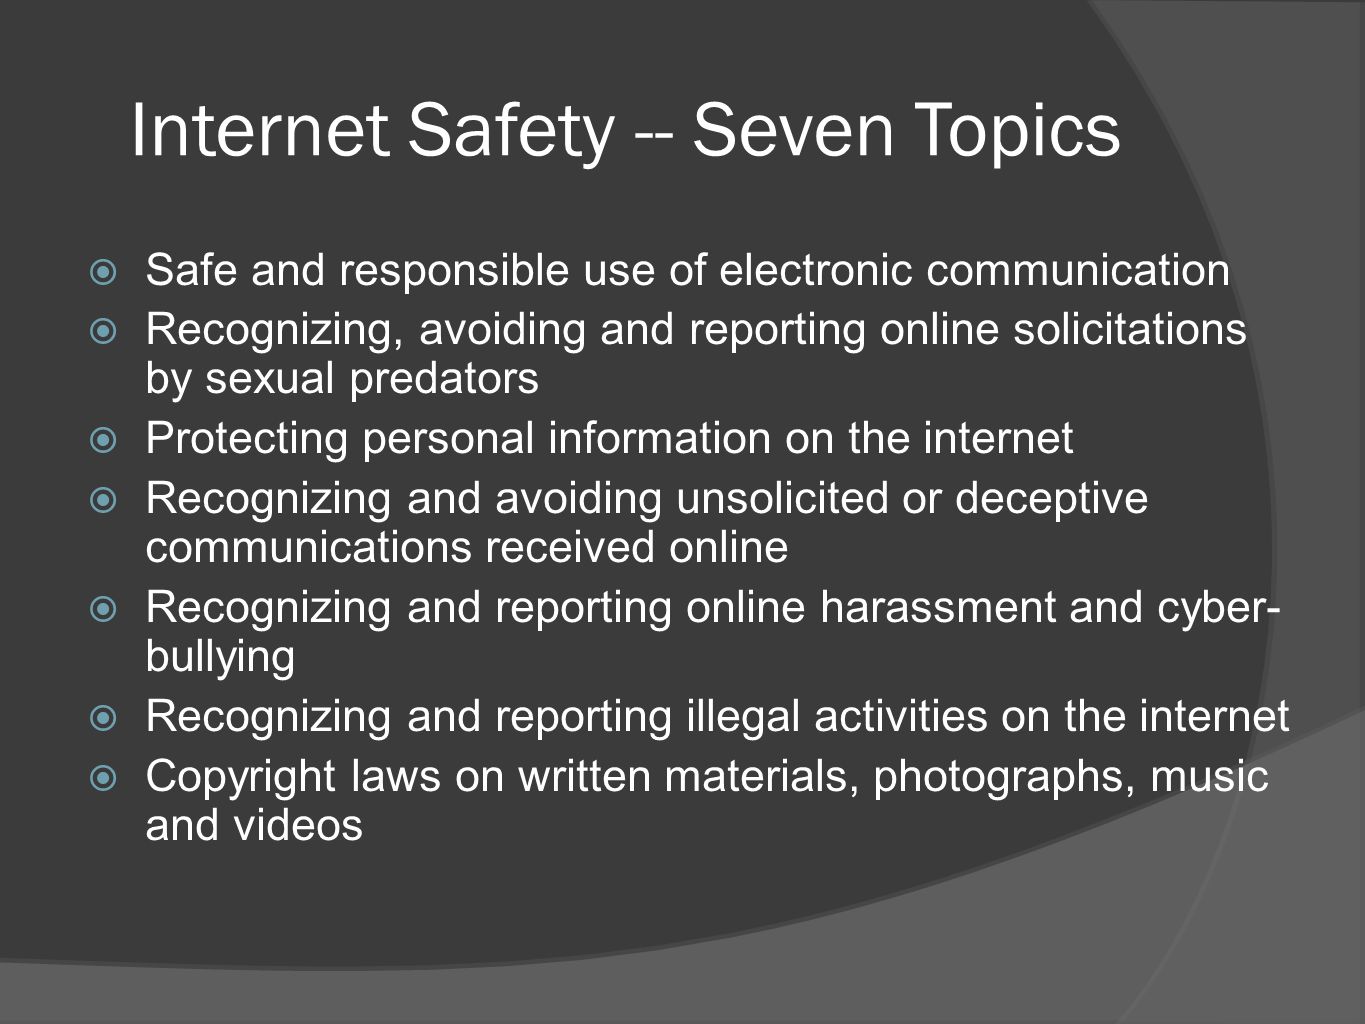 Internet Safety -- Seven Topics  Safe and responsible use of electronic communication  Recognizing, avoiding and reporting online solicitations by sexual predators  Protecting personal information on the internet  Recognizing and avoiding unsolicited or deceptive communications received online  Recognizing and reporting online harassment and cyber- bullying  Recognizing and reporting illegal activities on the internet  Copyright laws on written materials, photographs, music and videos